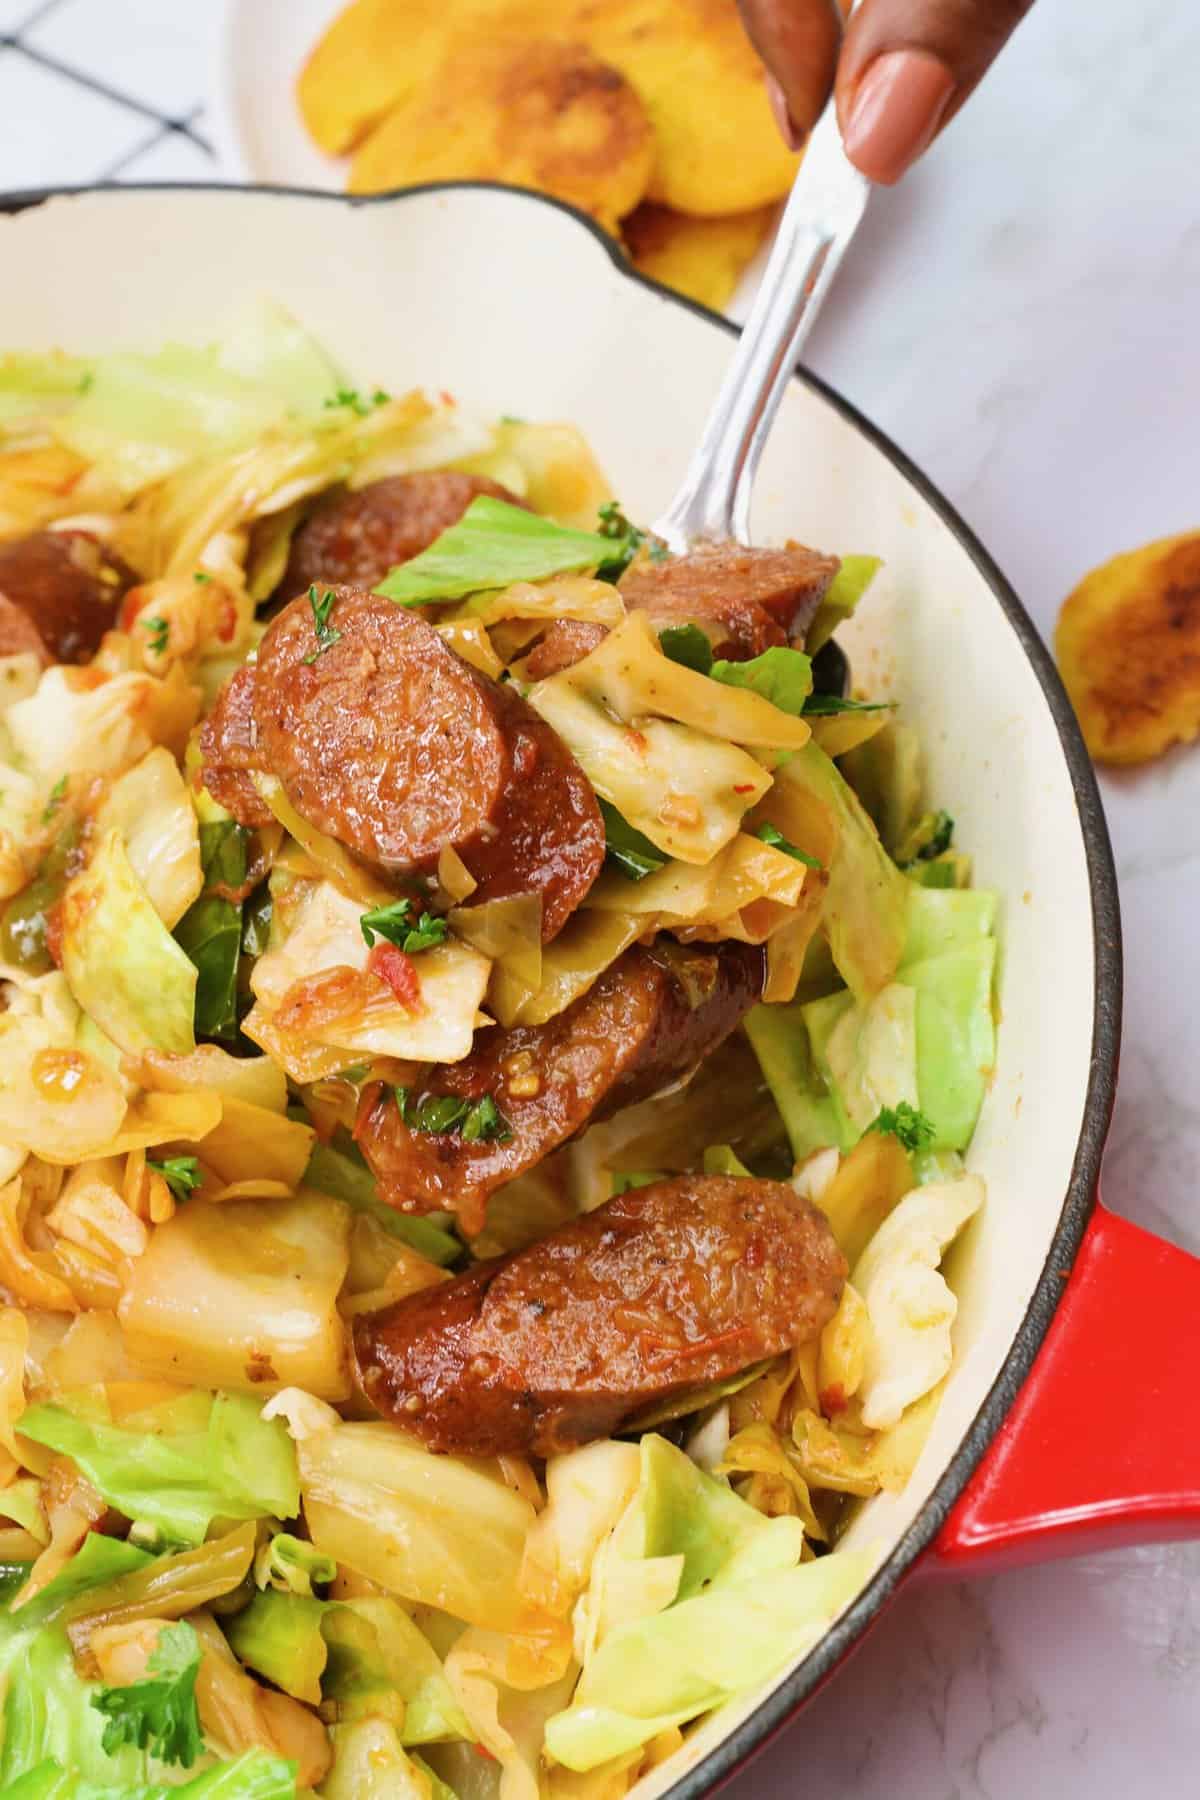 Serving up soul-satisfying cabbage and sausage